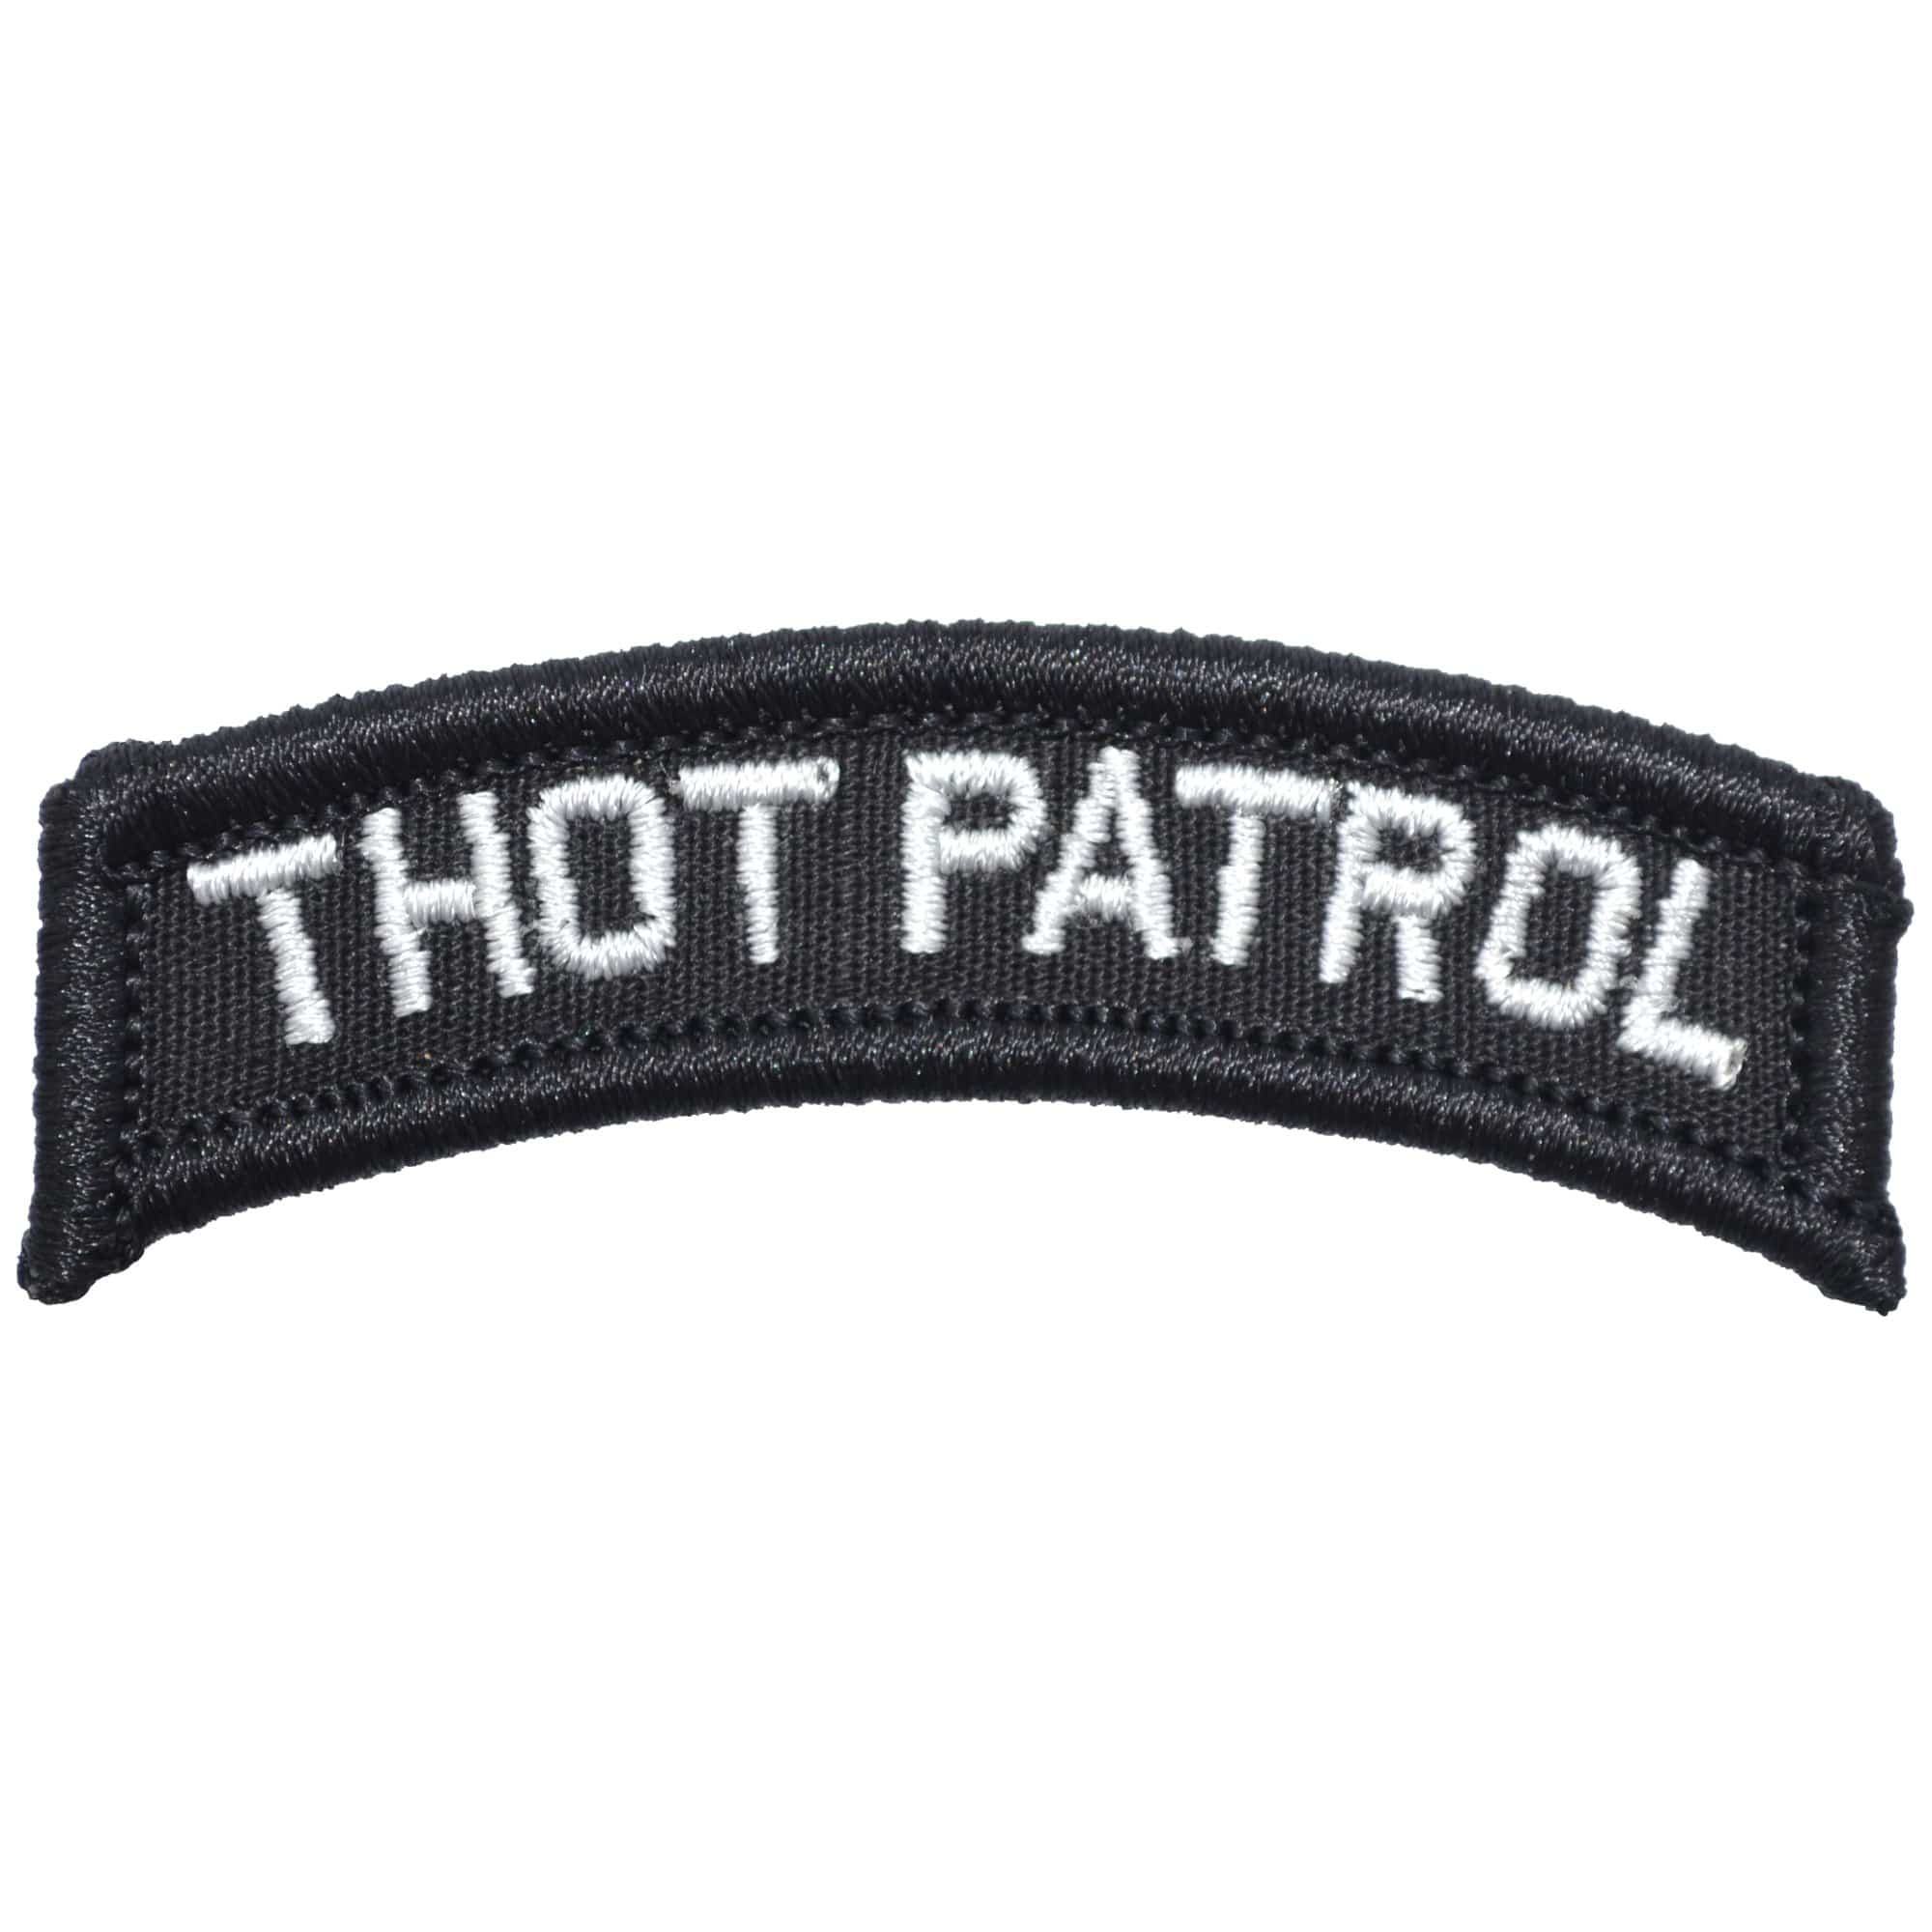 Tactical Gear Junkie Patches Black Thot Patrol Tab Patch